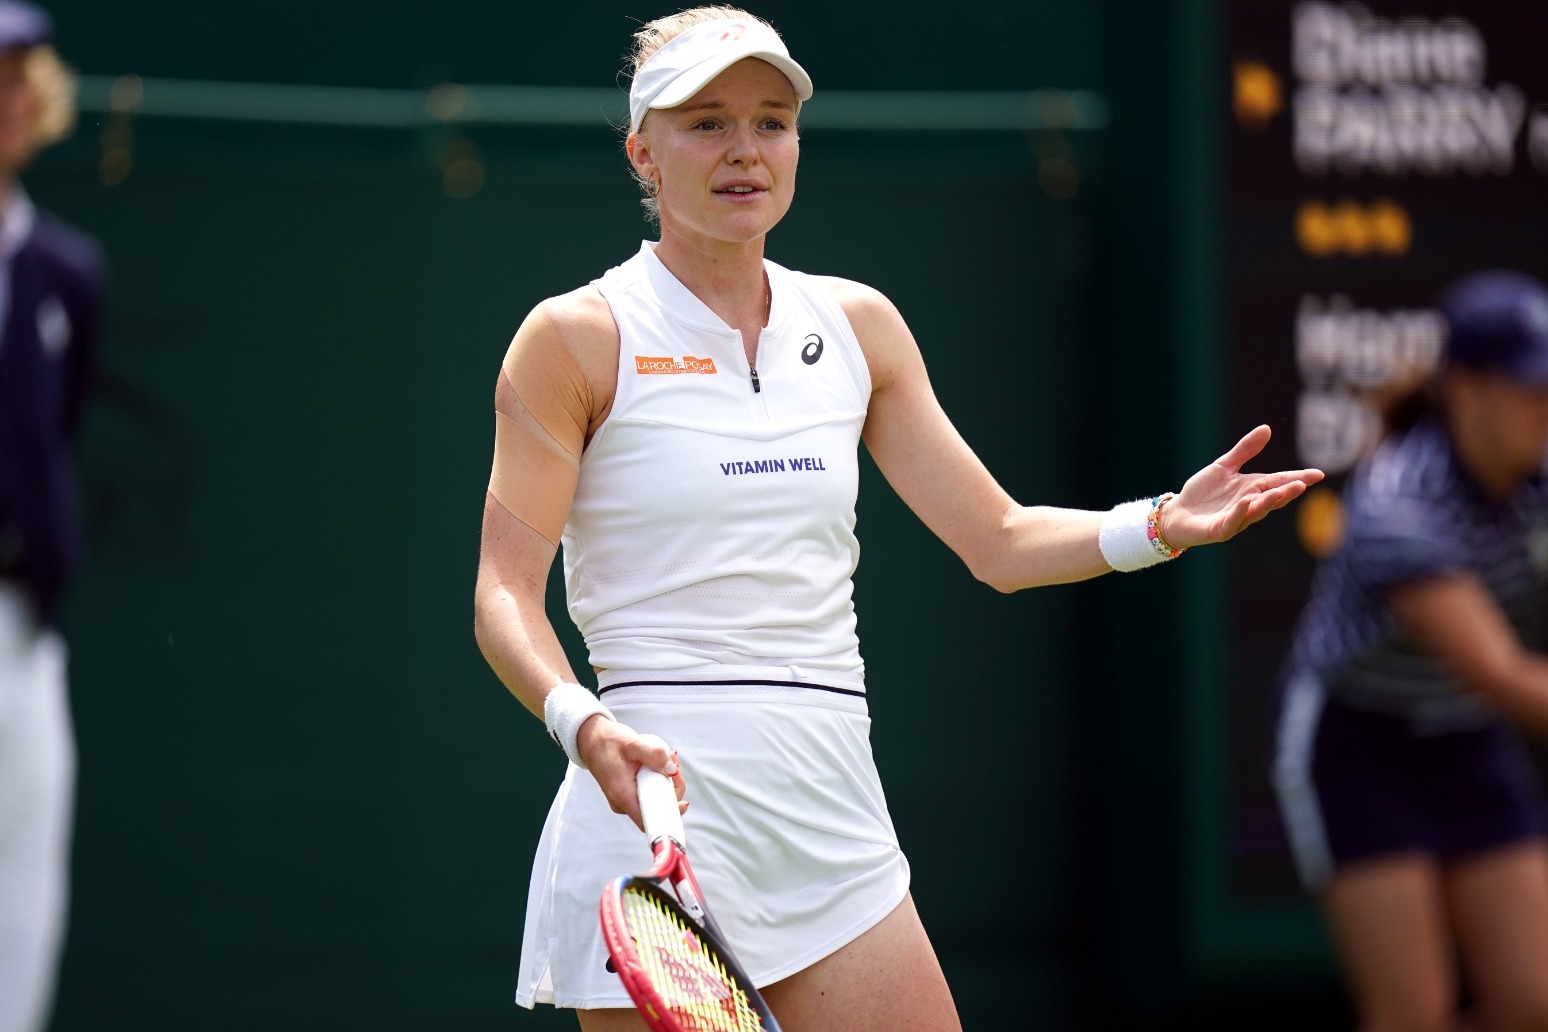 Harriet Dart becomes the first British player knocked out of Wimbledon 